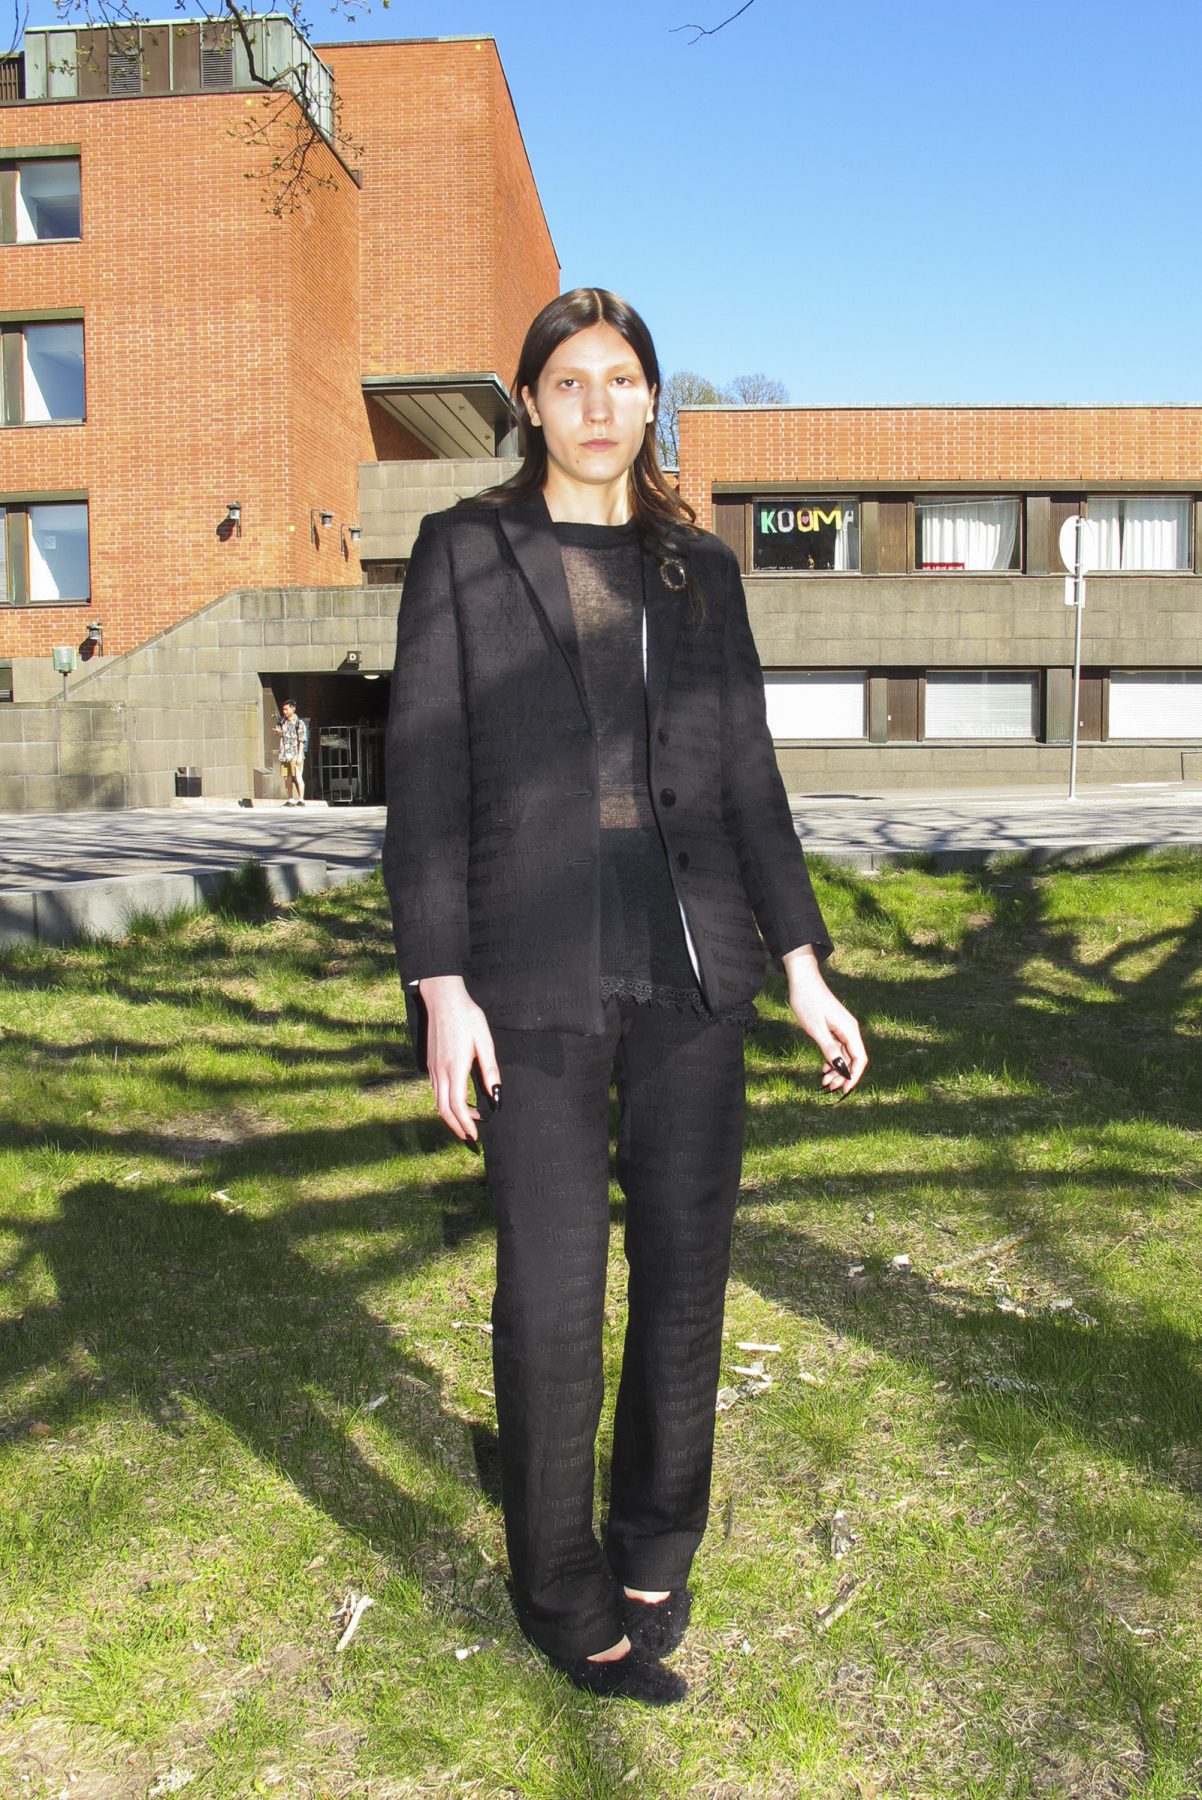 Model is wearing a black cropped suit jacket, sheer shirt underneath and black suit pants